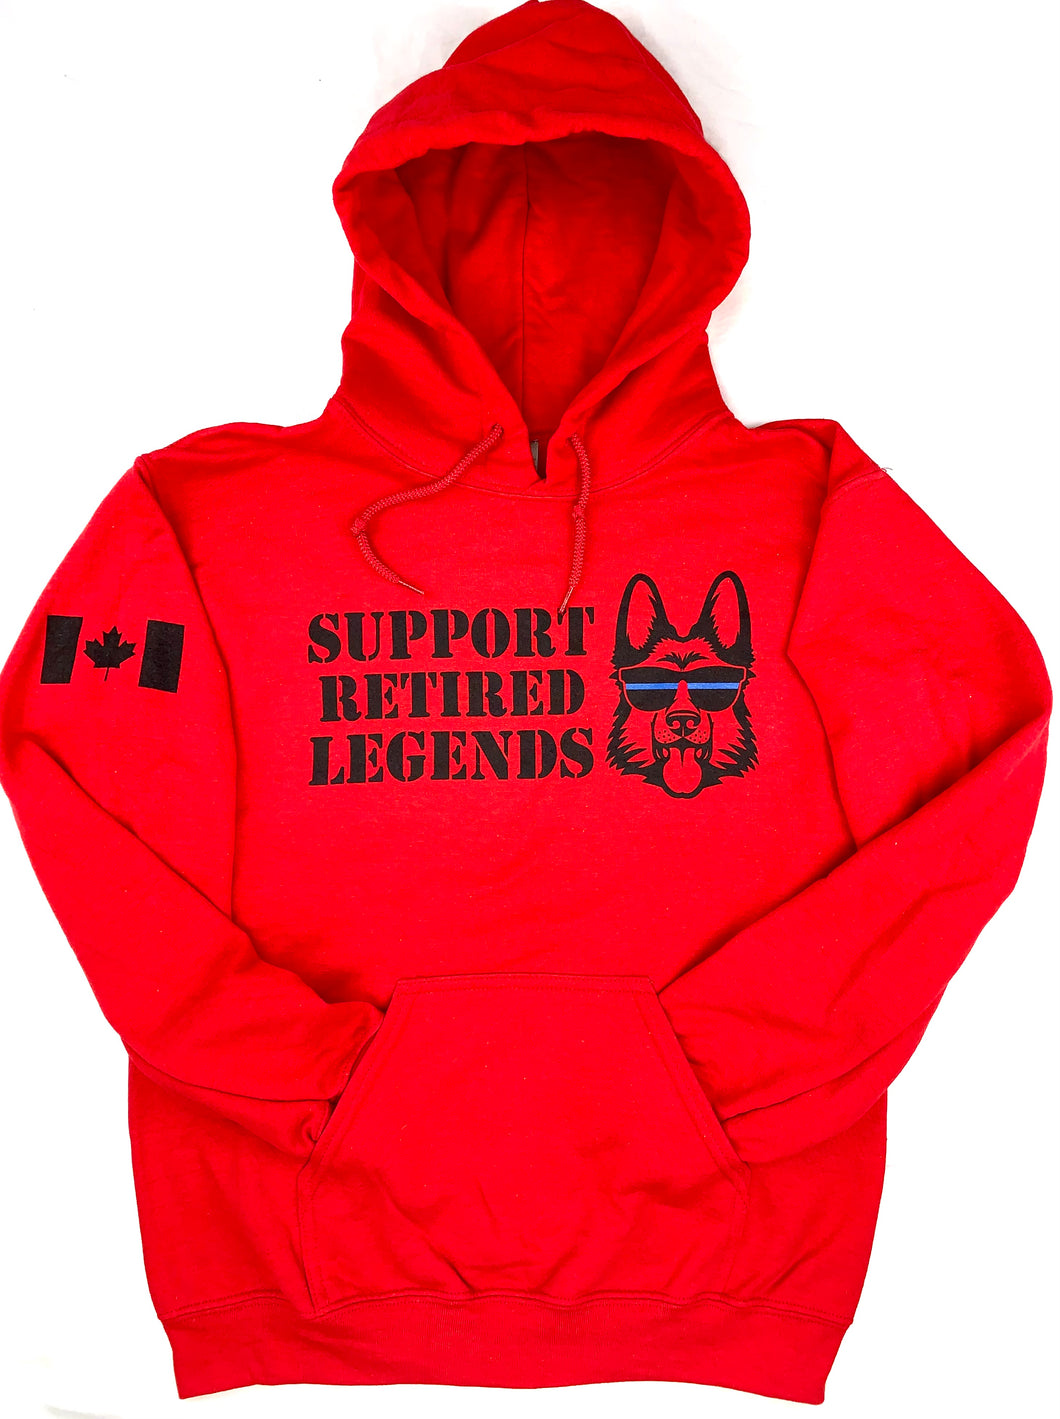 The Canadian Legends Hoodie